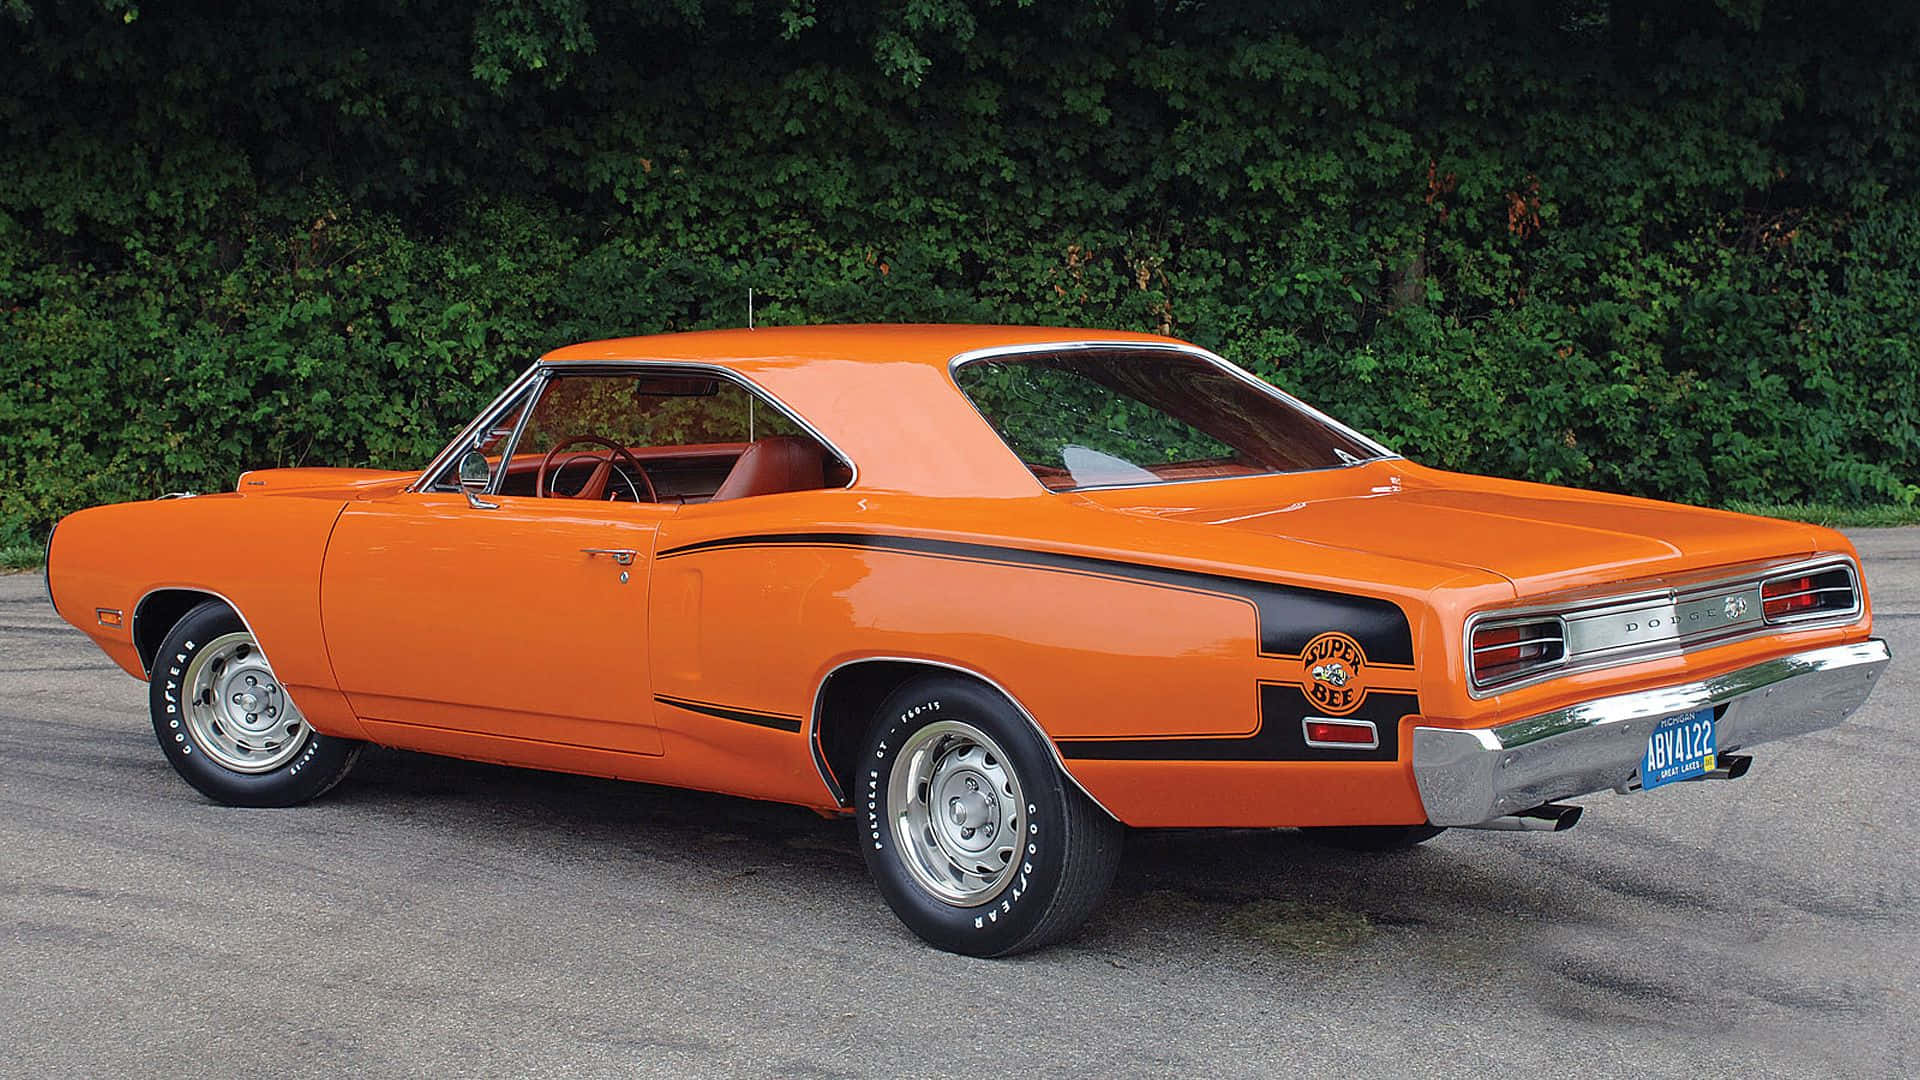 Caption: Power And Performance Personified - Dodge Super Bee Wallpaper